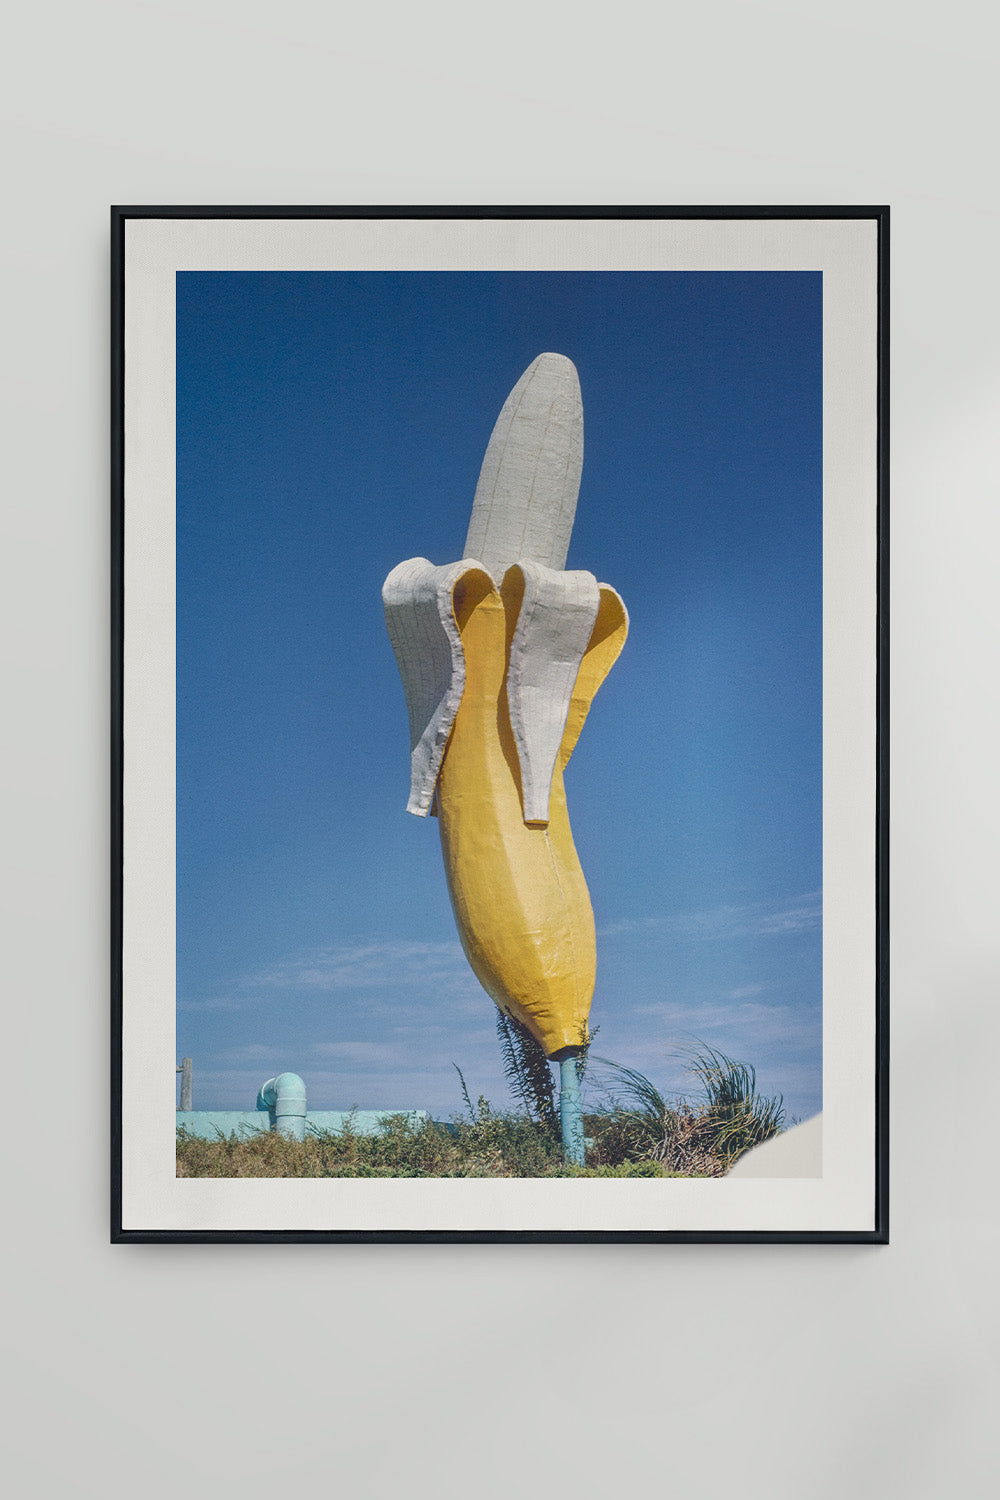 John Margolies' photograph of Banana Waterslide roadside attraction with bright blue sky.